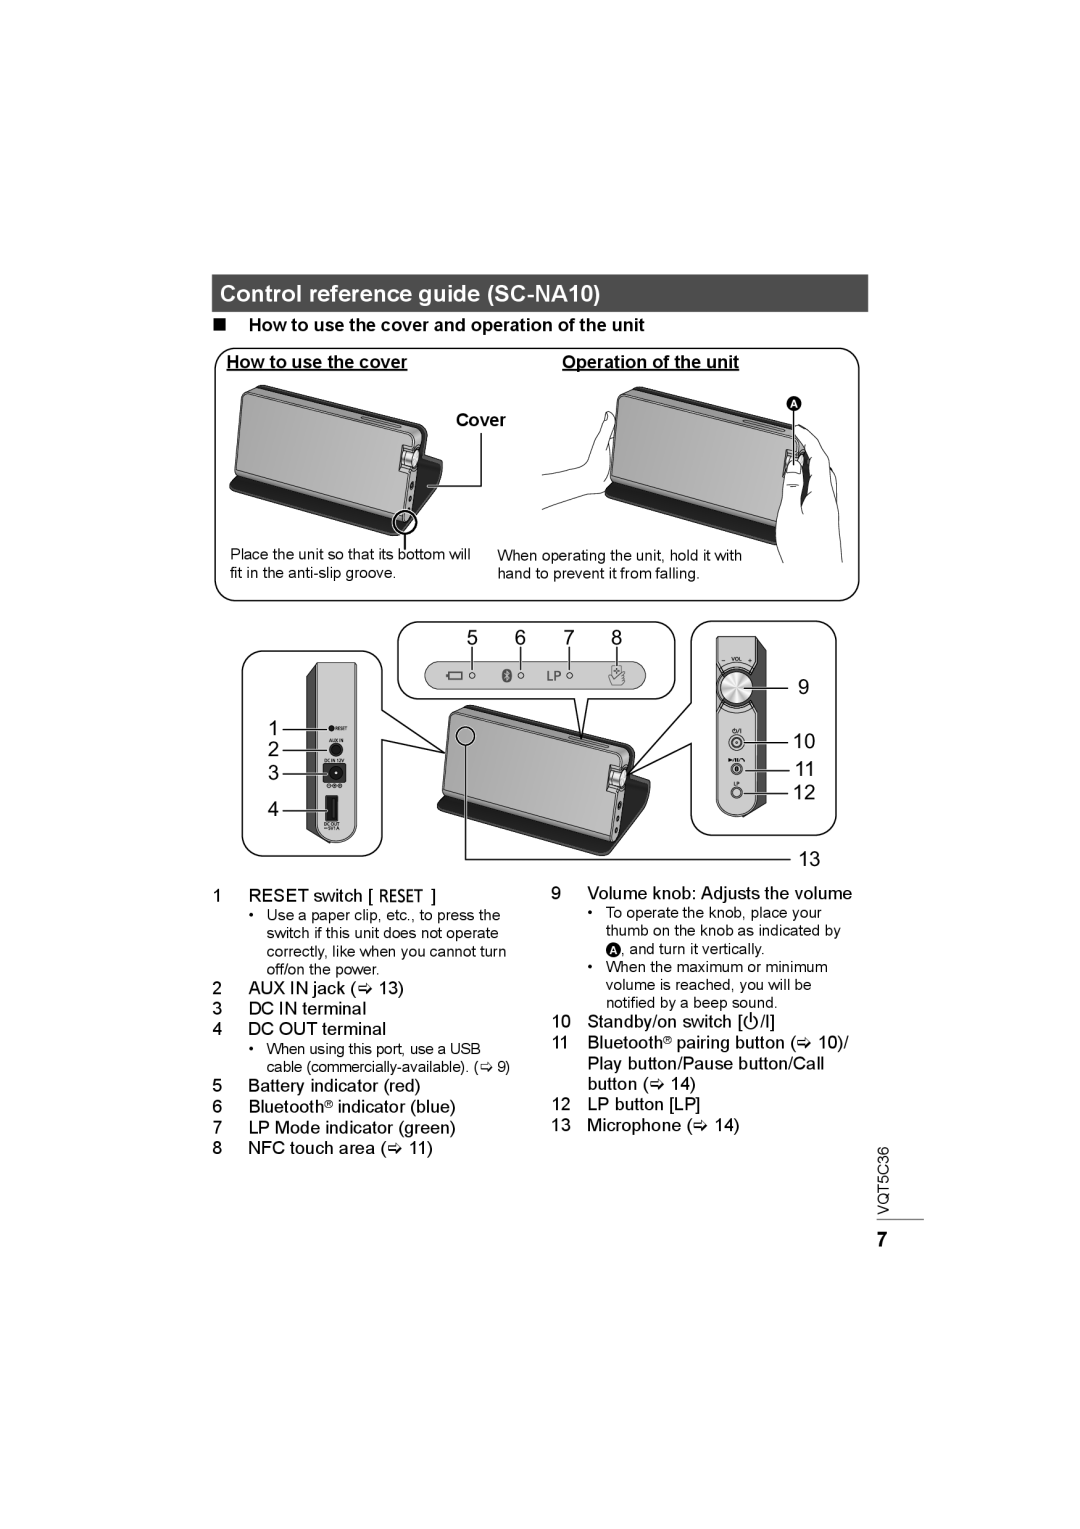 Panasonic SC-NA30 owner manual Control reference guide SC-NA10, How to use the cover and operation of the unit, Cover  